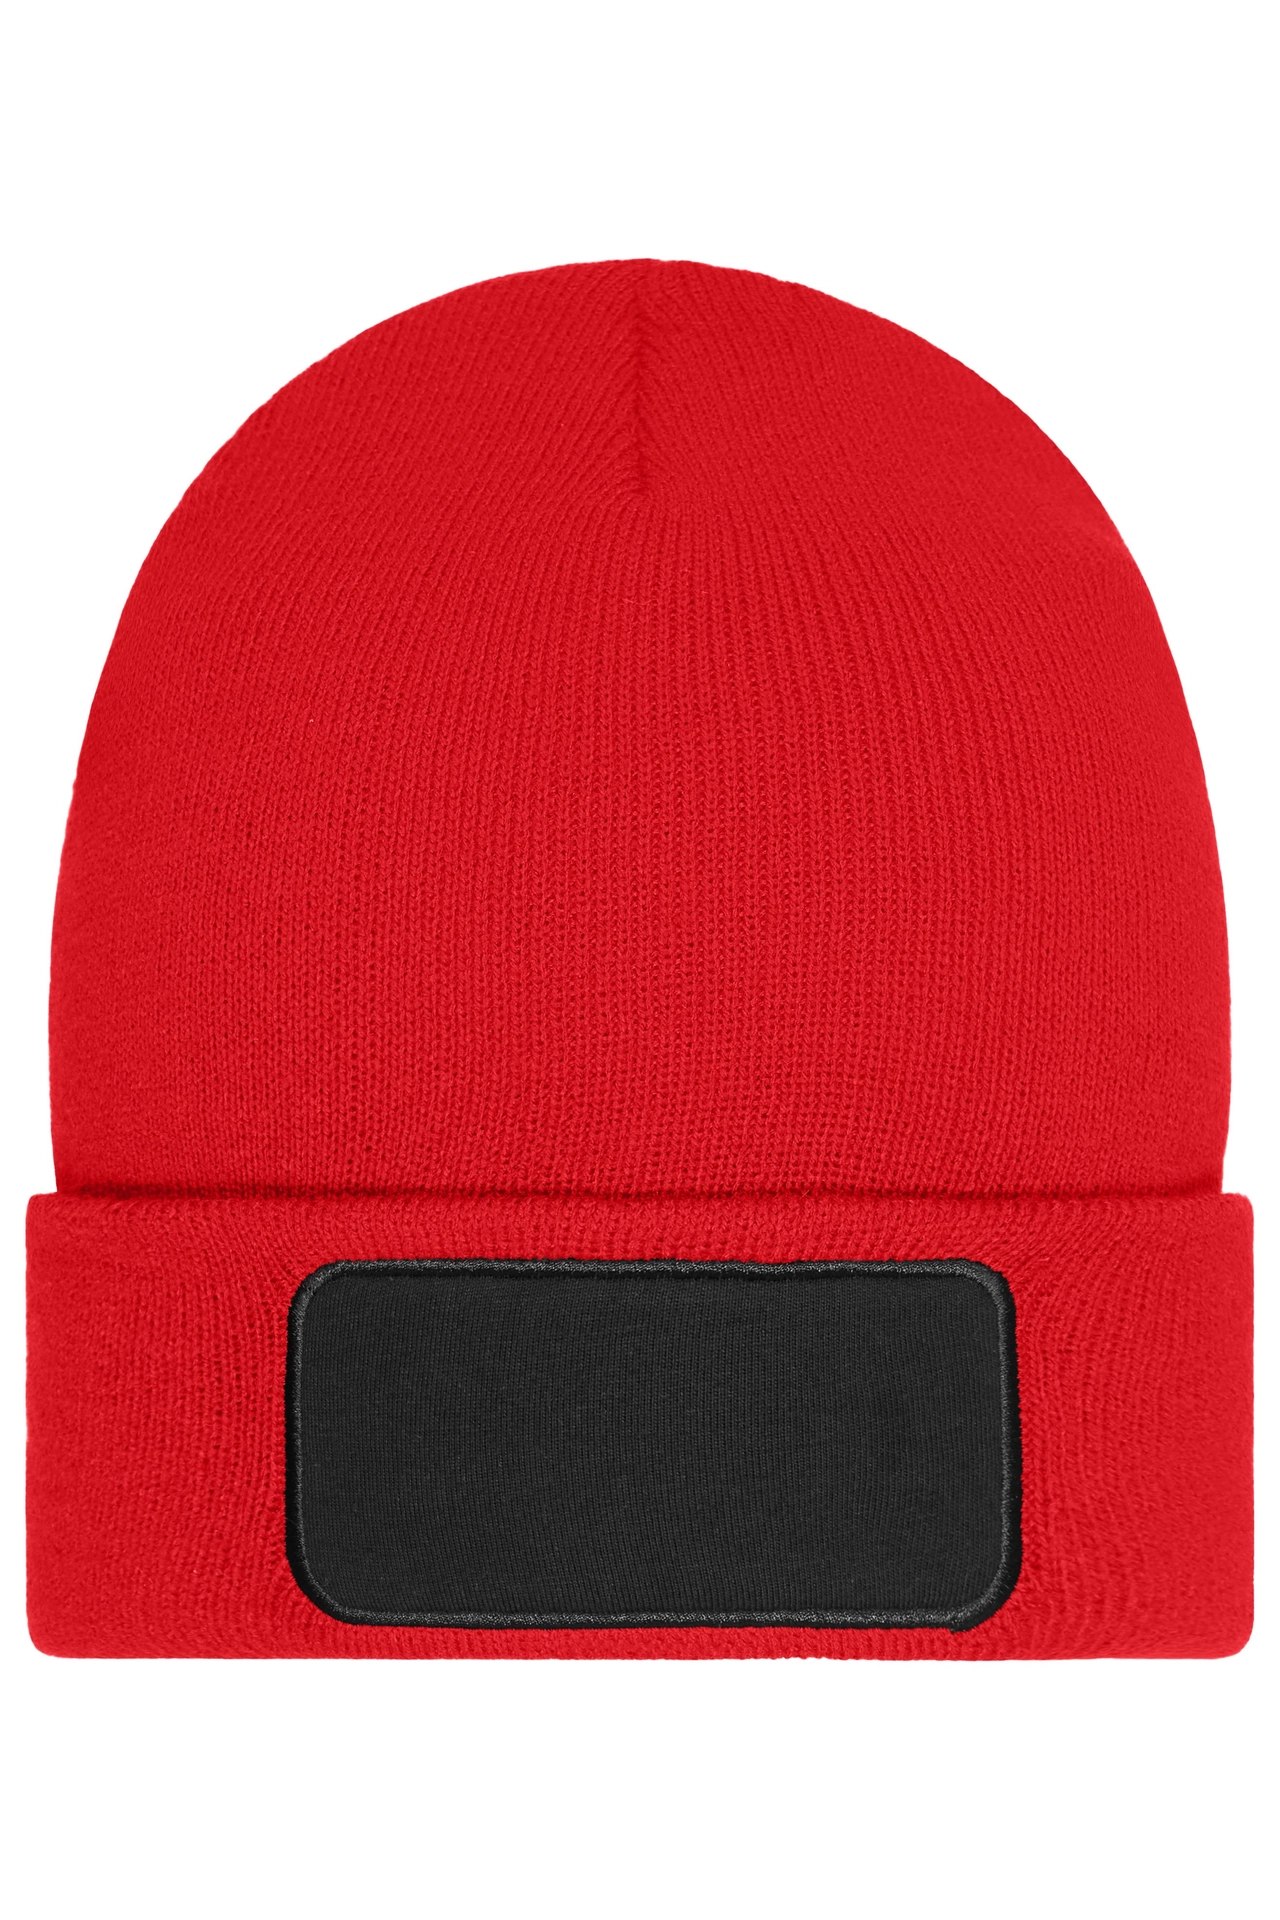 Beanie with Patch (10cm x 5 cm) - Thinsulate